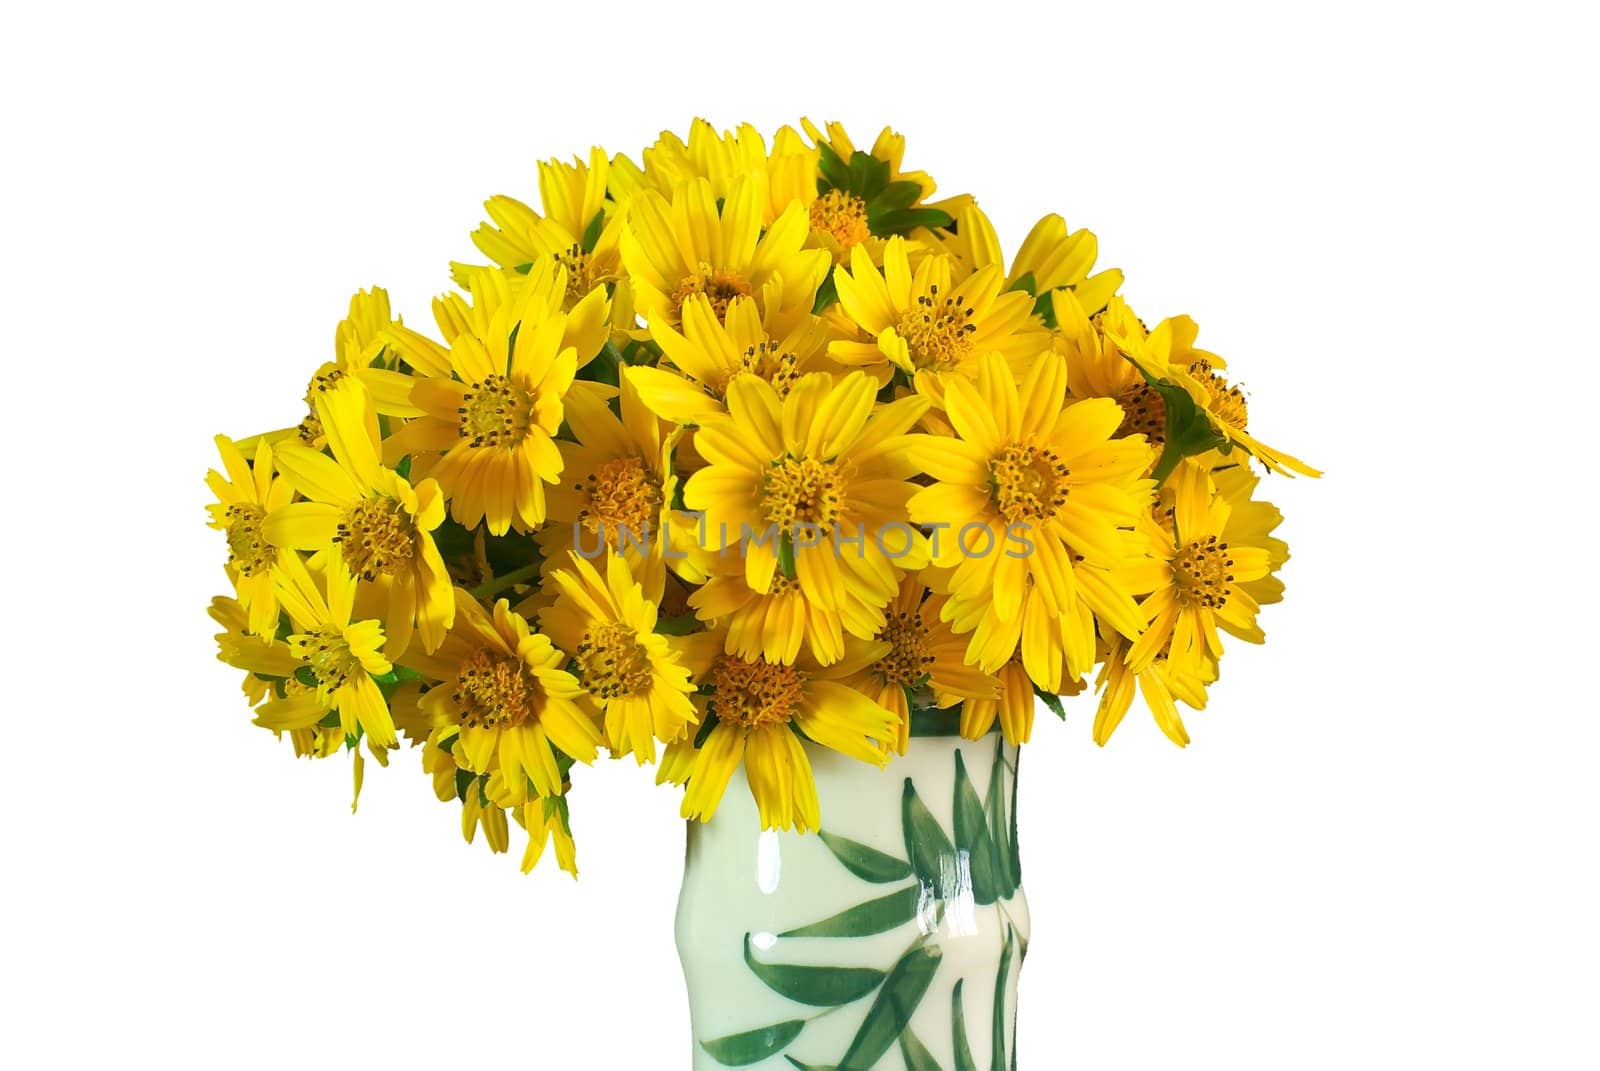 Yellow daisy in a vase